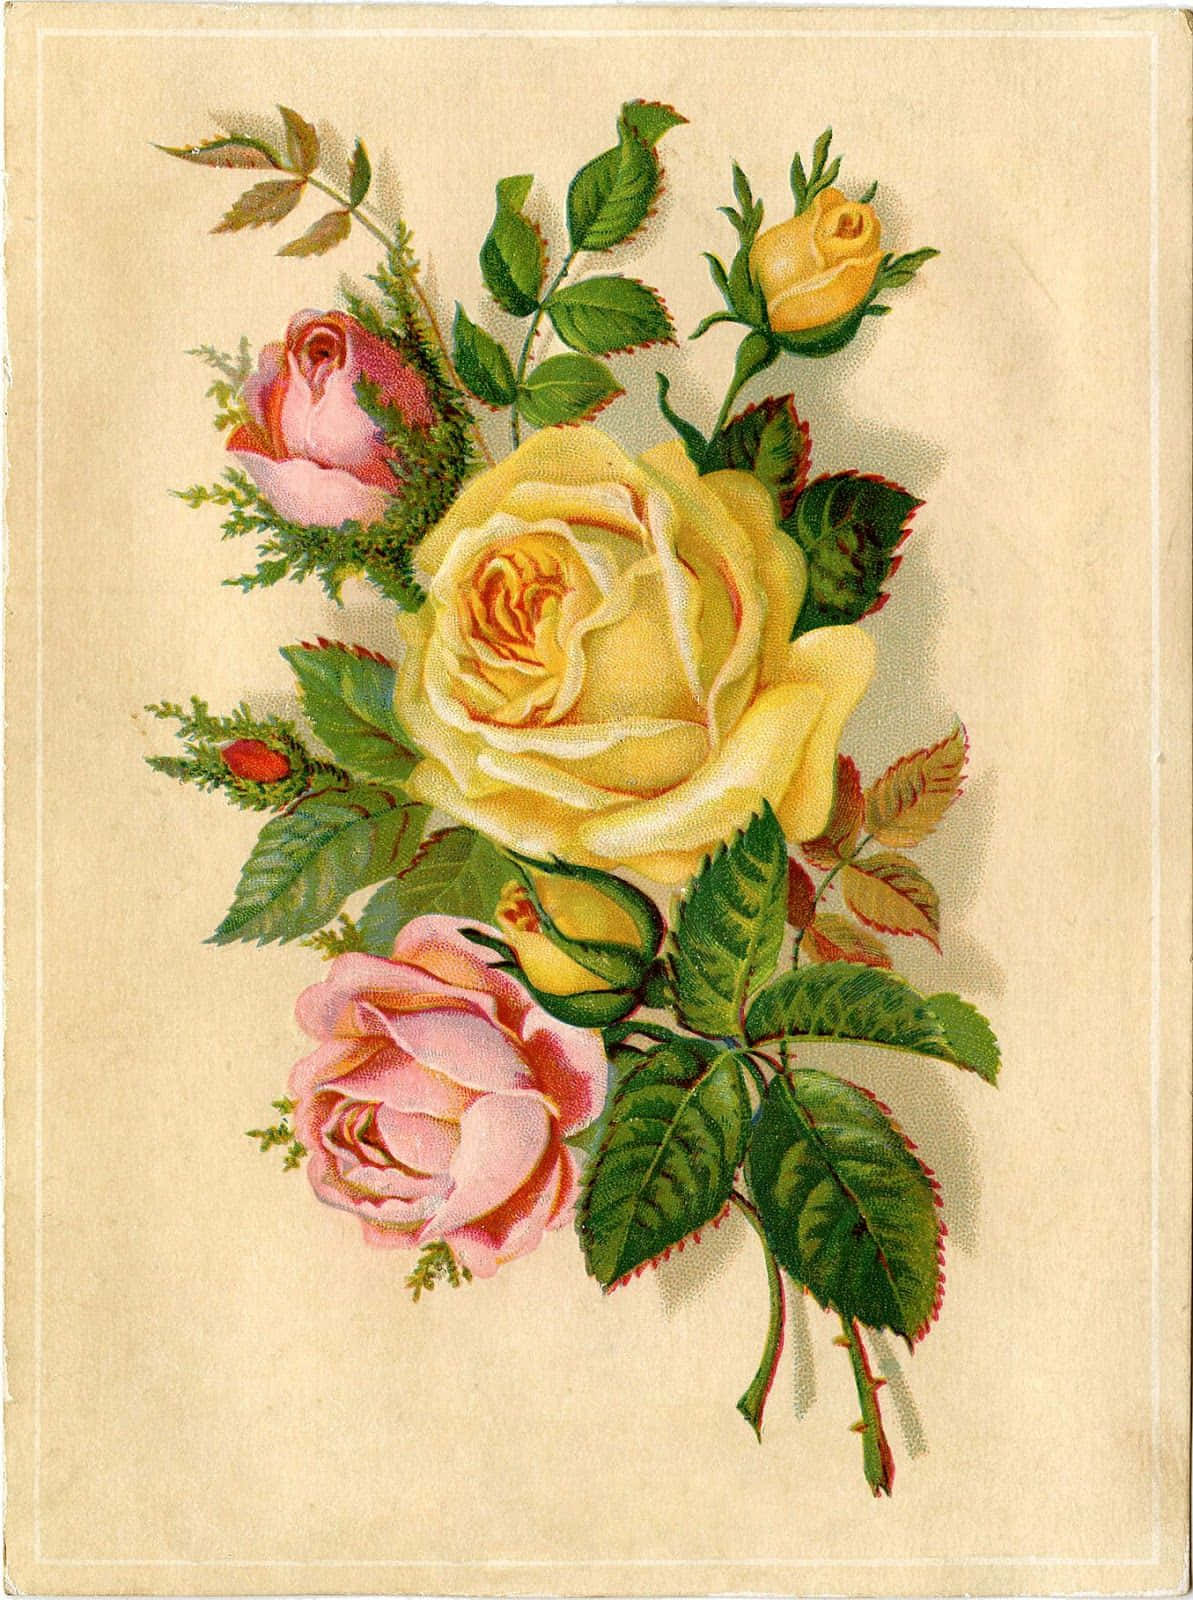 A beautiful, close-up image of a vintage rose with soft pink petals in full bloom Wallpaper